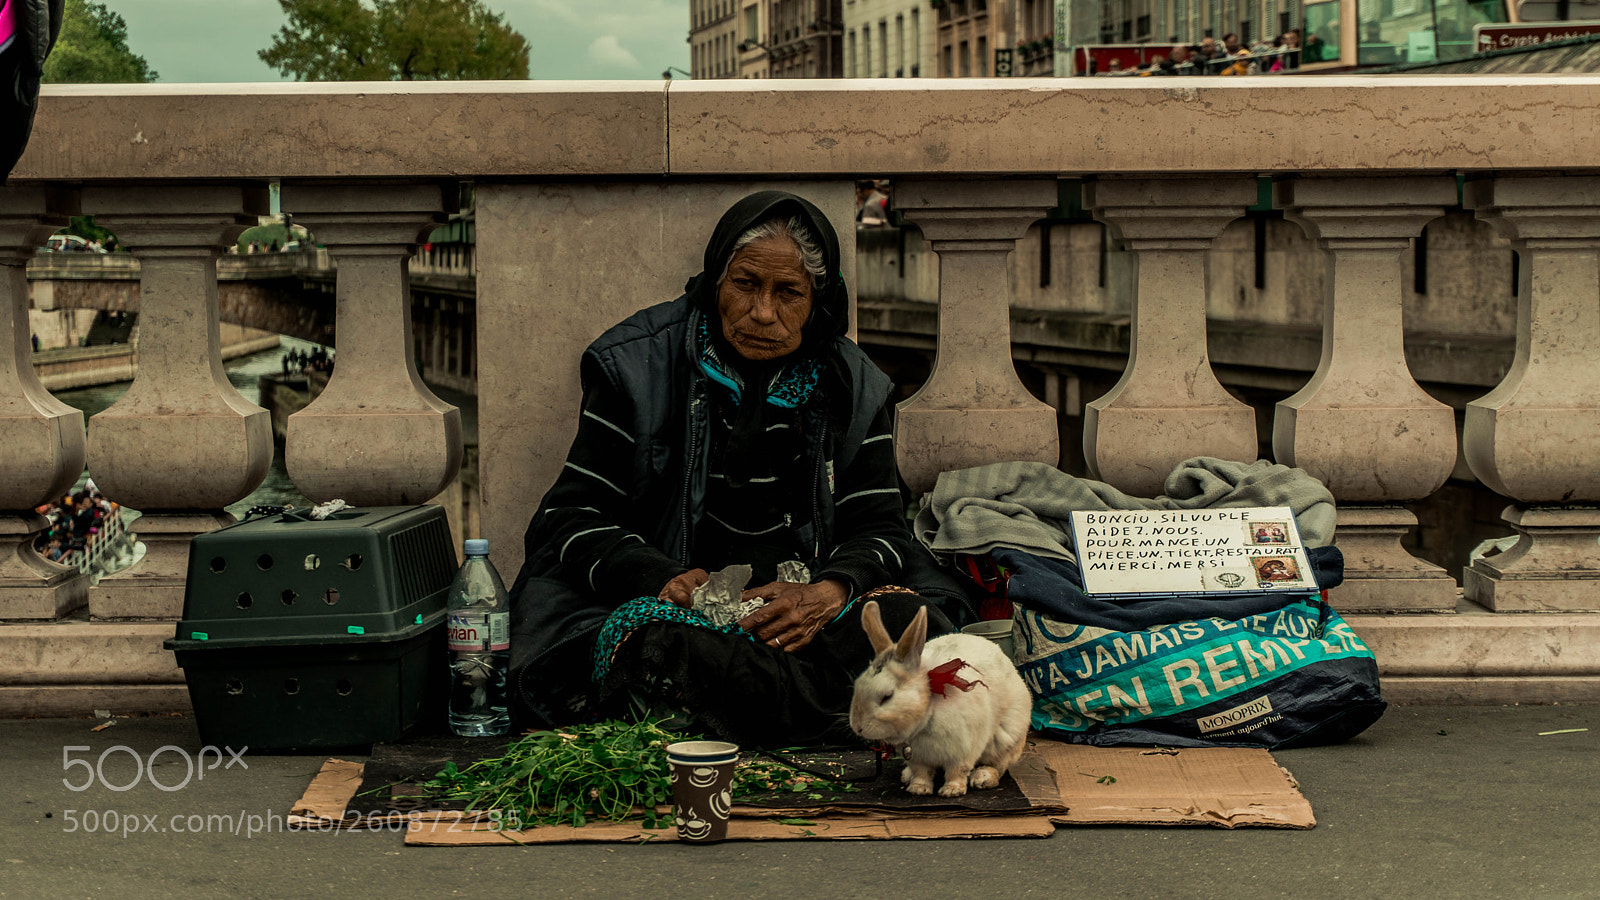 Sony a6300 sample photo. Old lady and rabbit photography